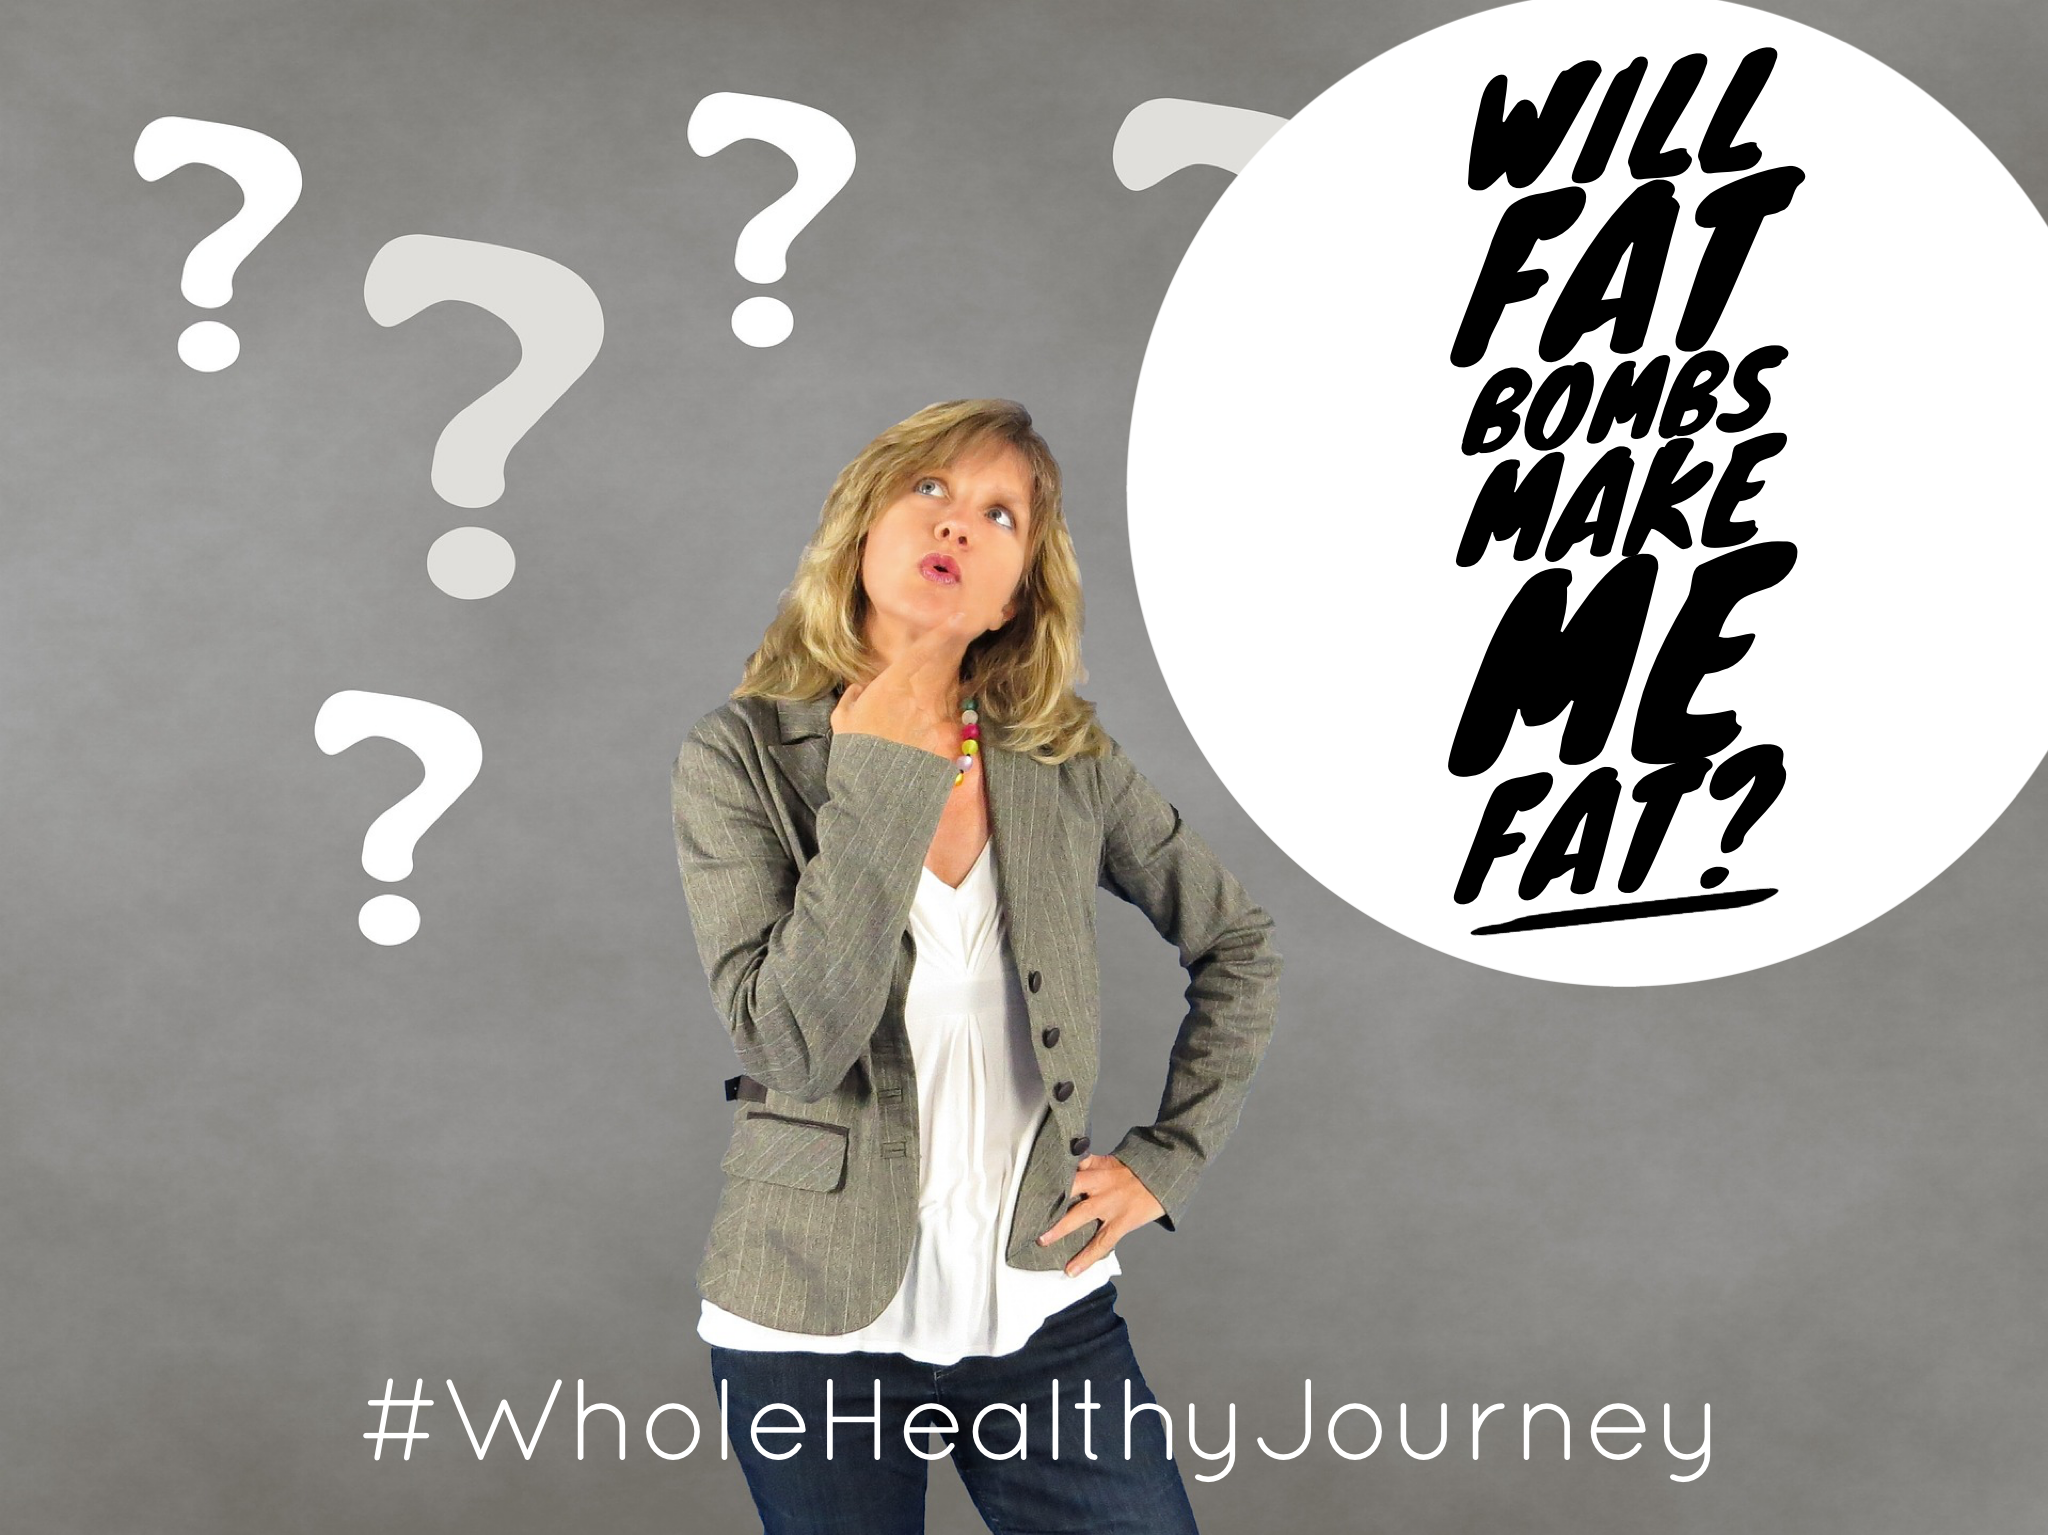 Whole Healthy Journey Fat Bombs